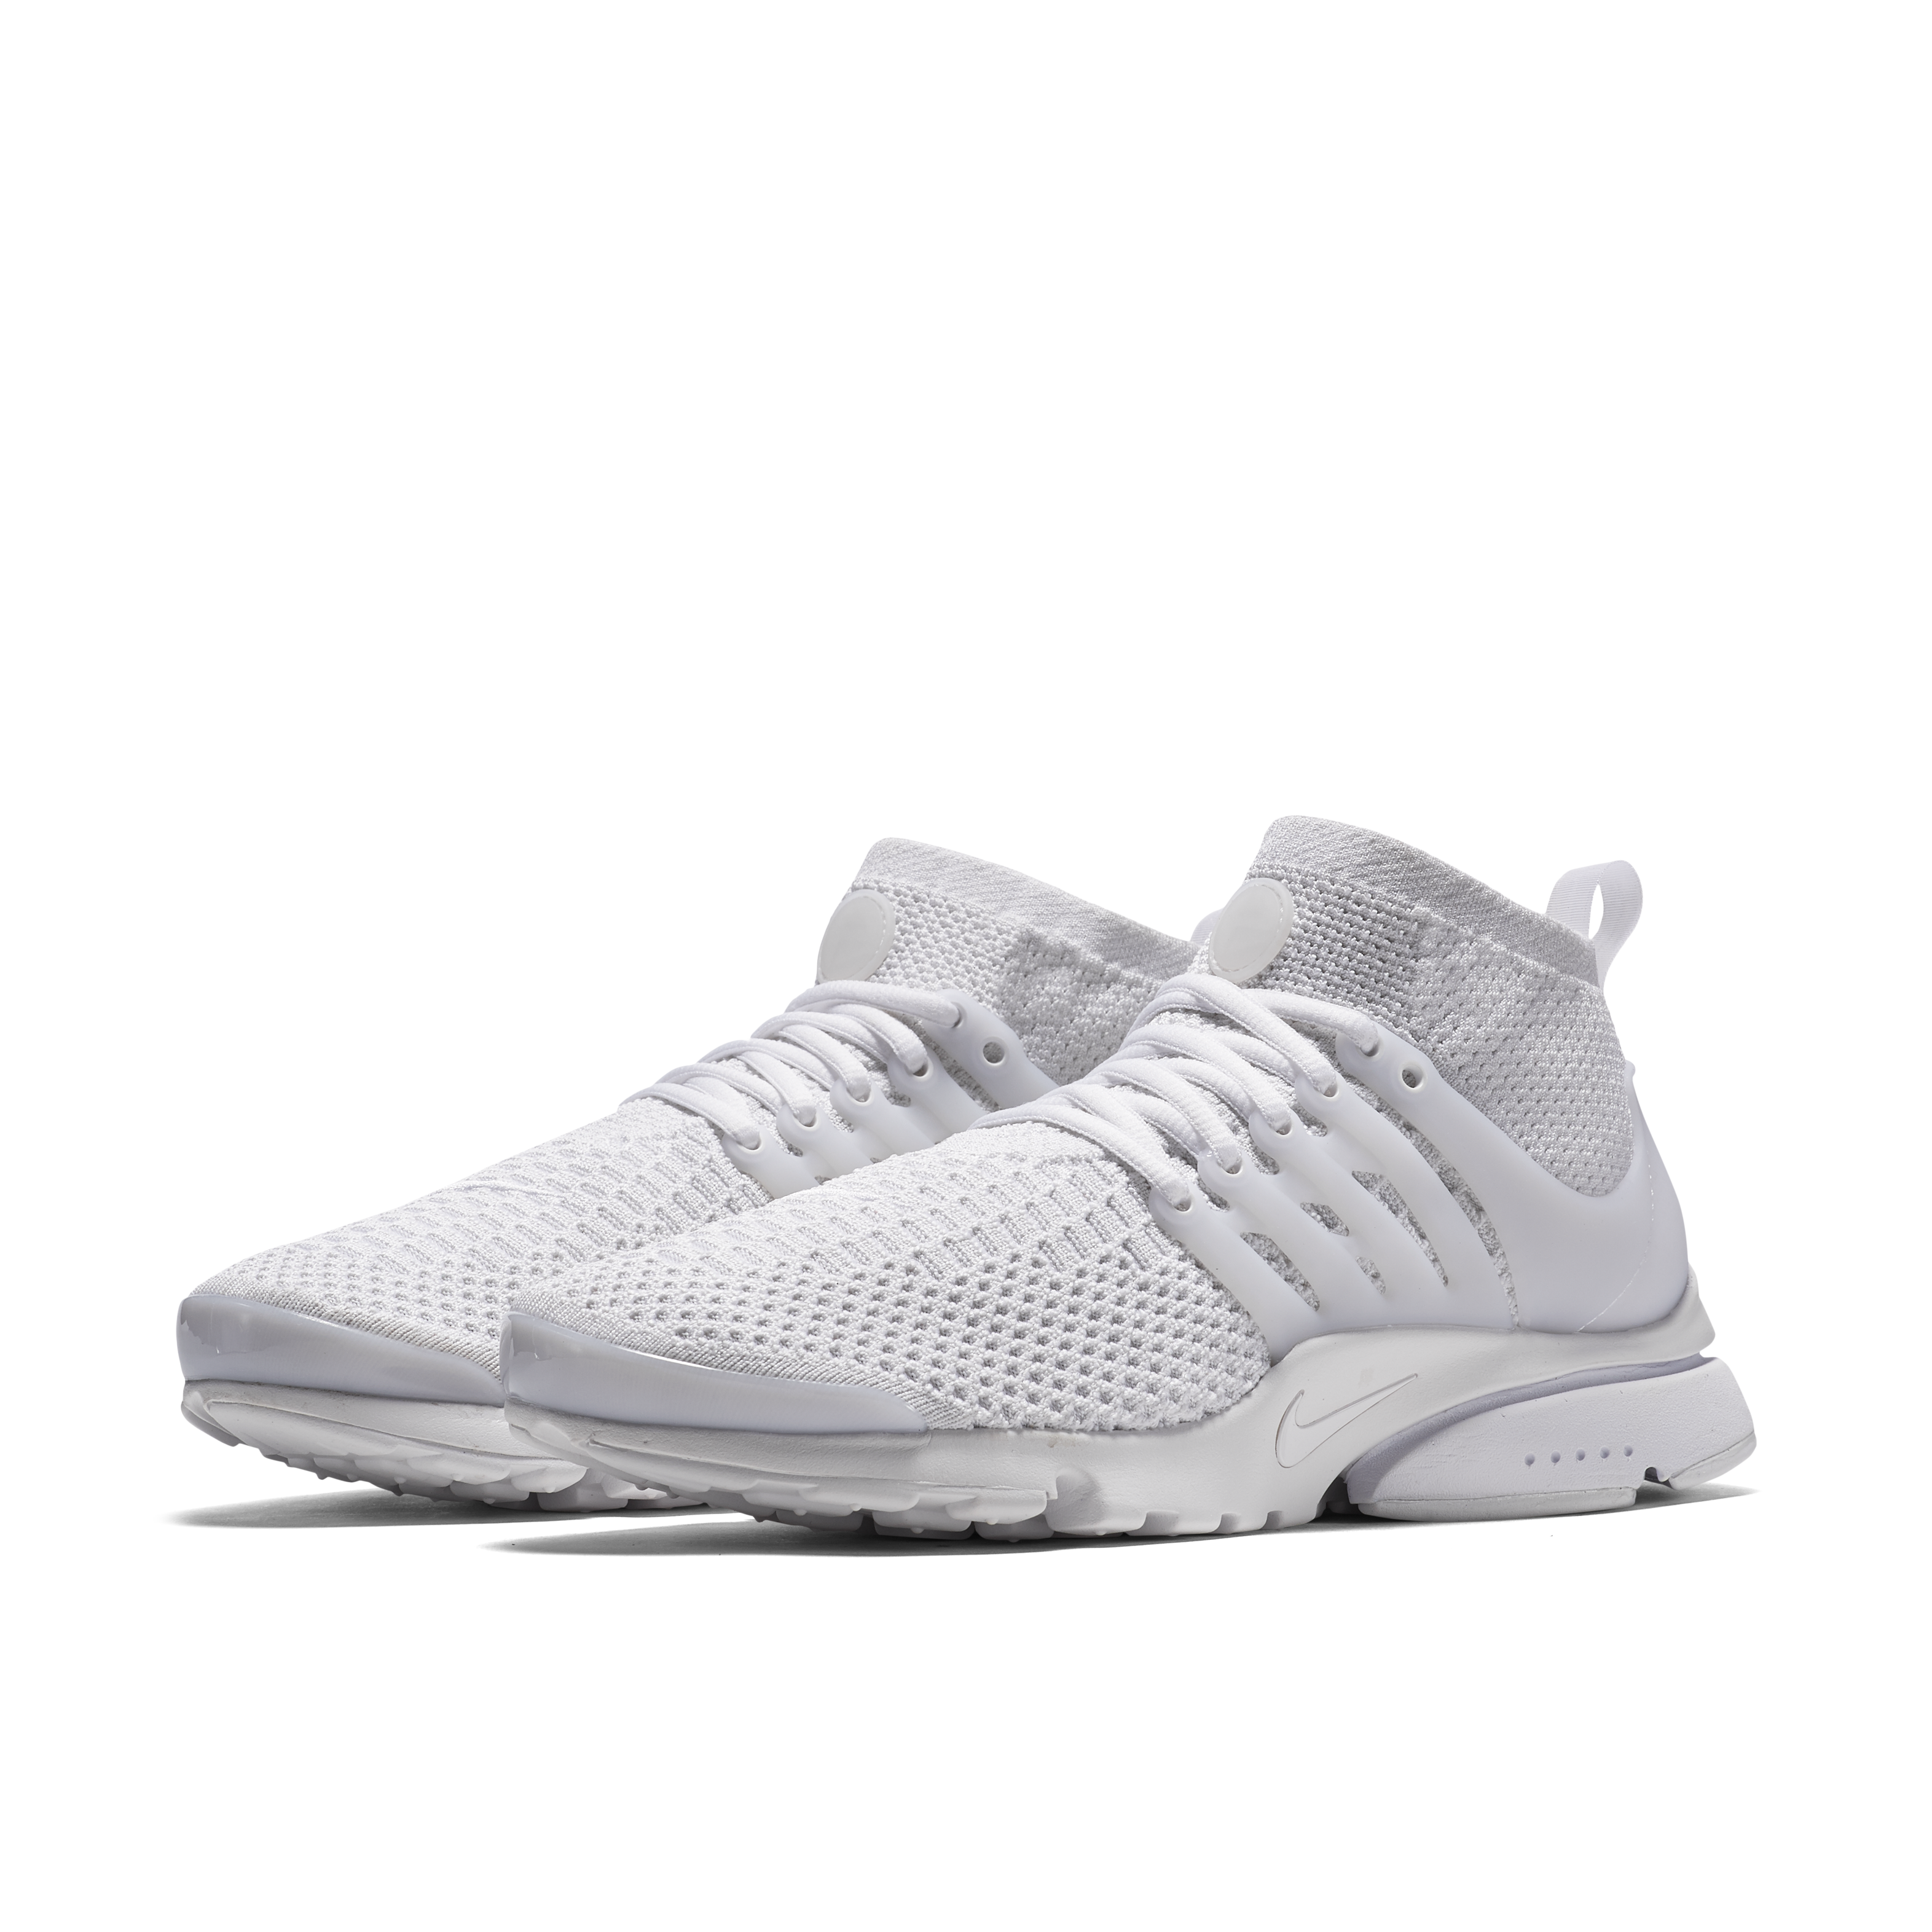 http://www.houyhnhnm.jp/news/images/Nike_Air_Presto_Ultra_Flyknit_4_original.png